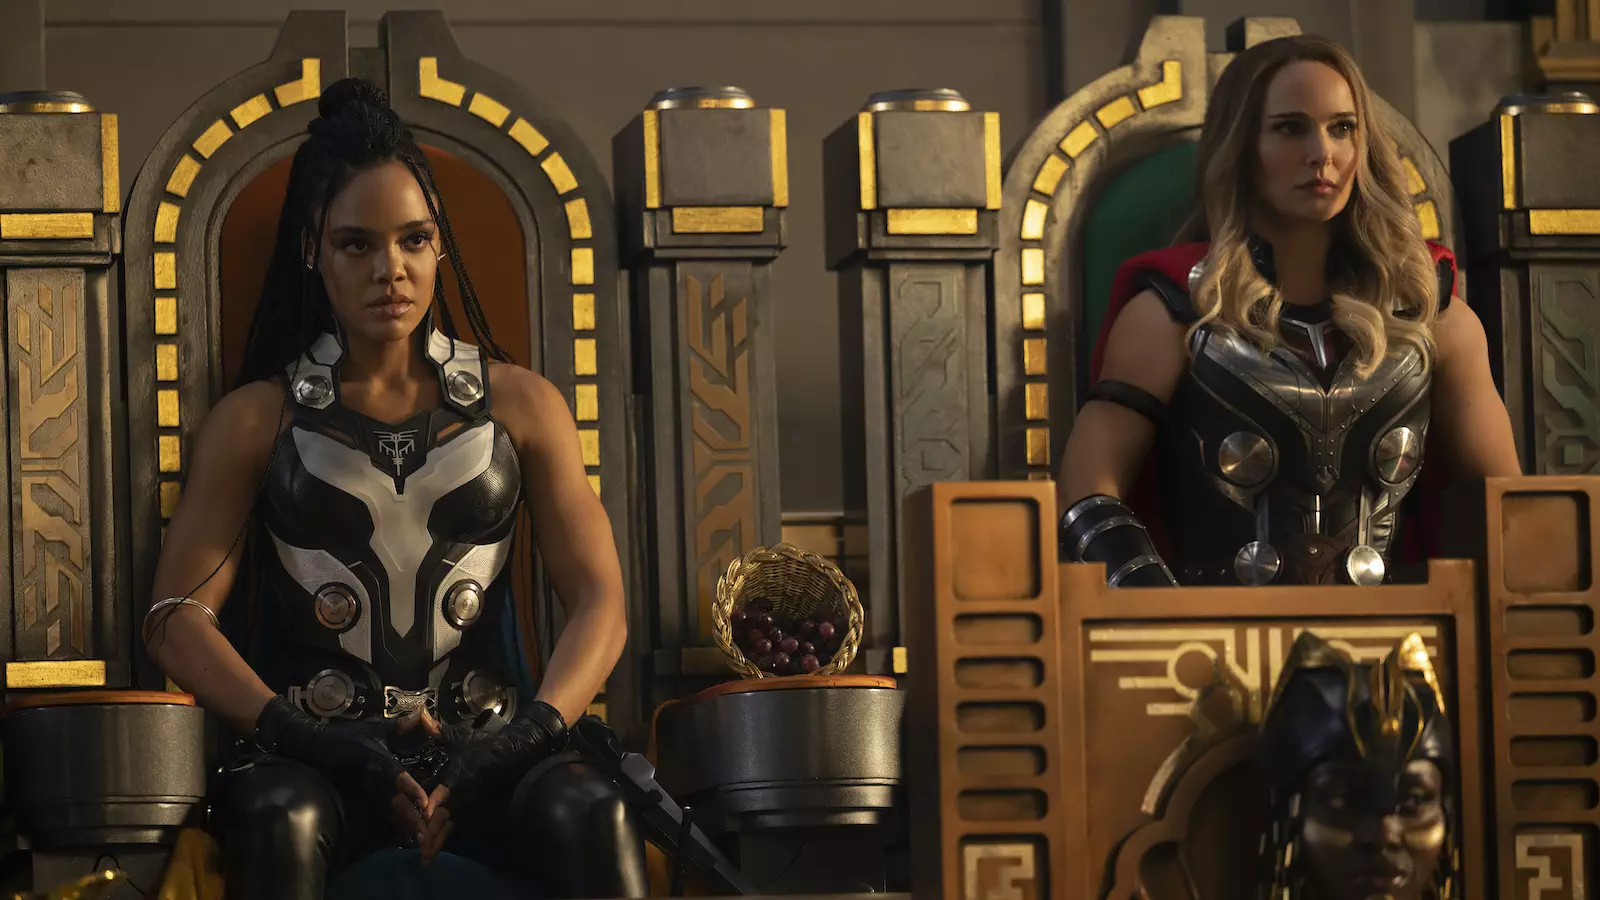 Thor: Love and Thunder image features King Valkyrie and Mighty Thor